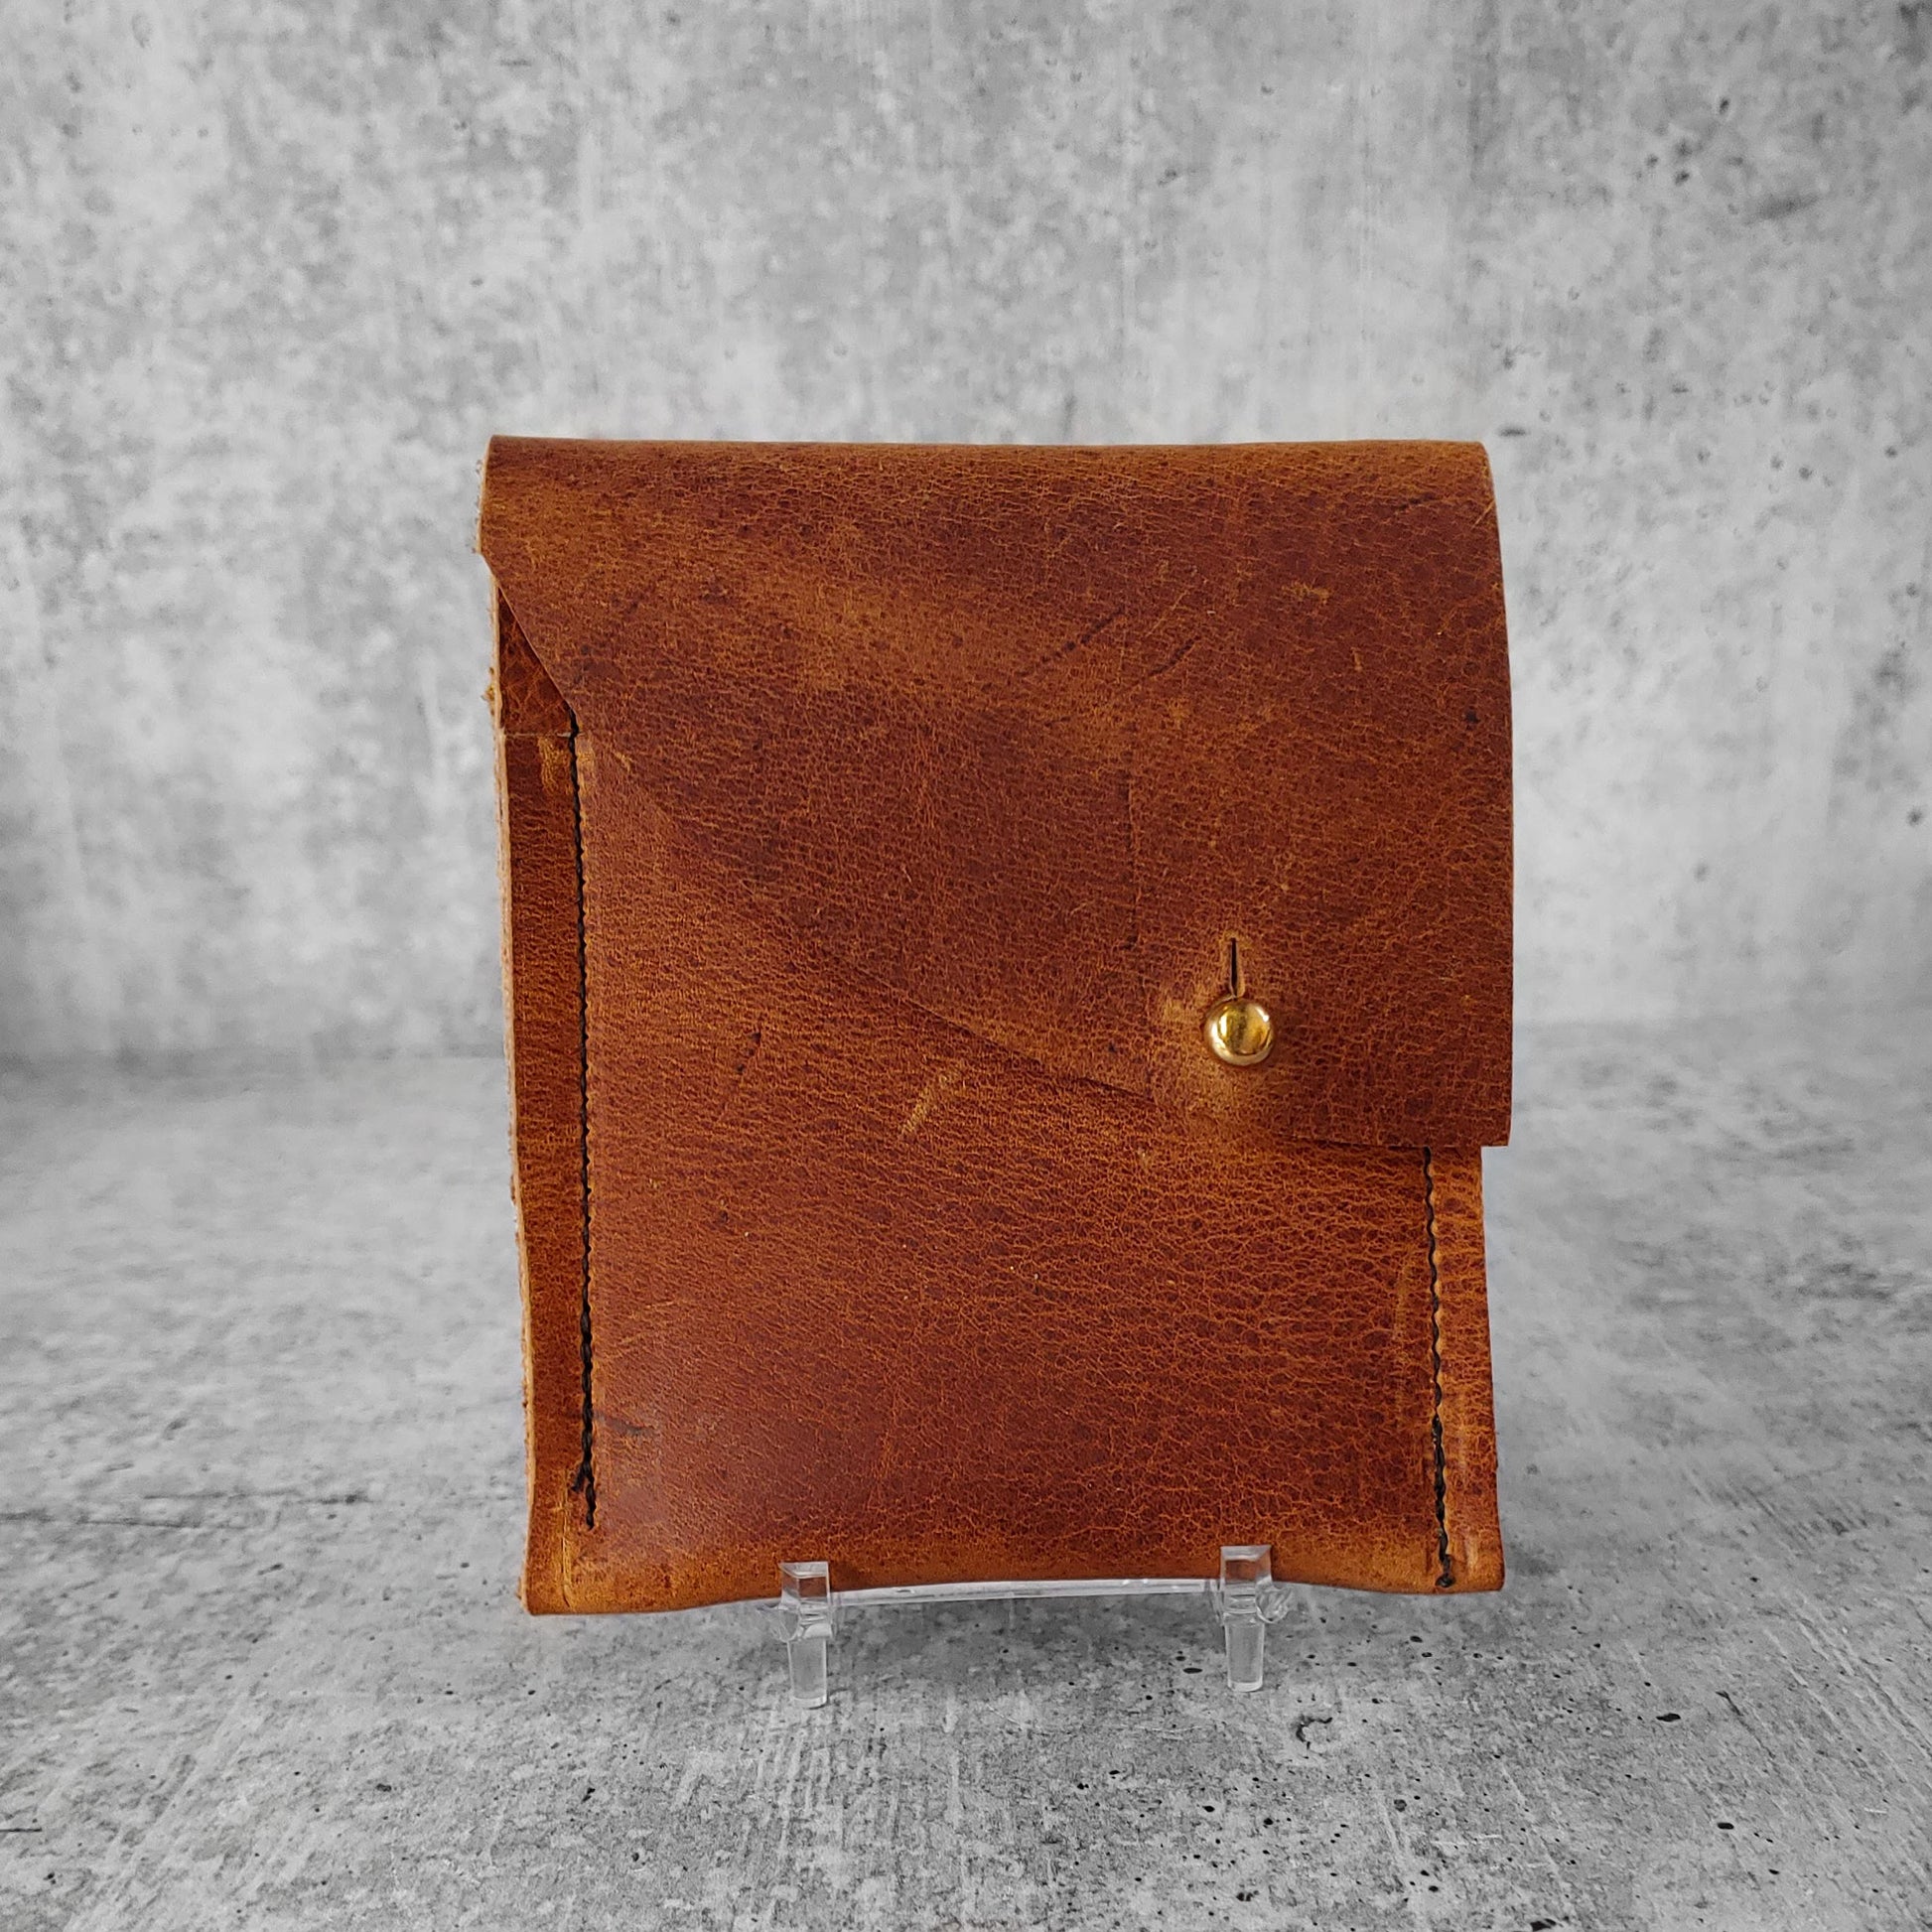 Front Facing view of "soft leather wallet right" in pecan brown against a concrete background.